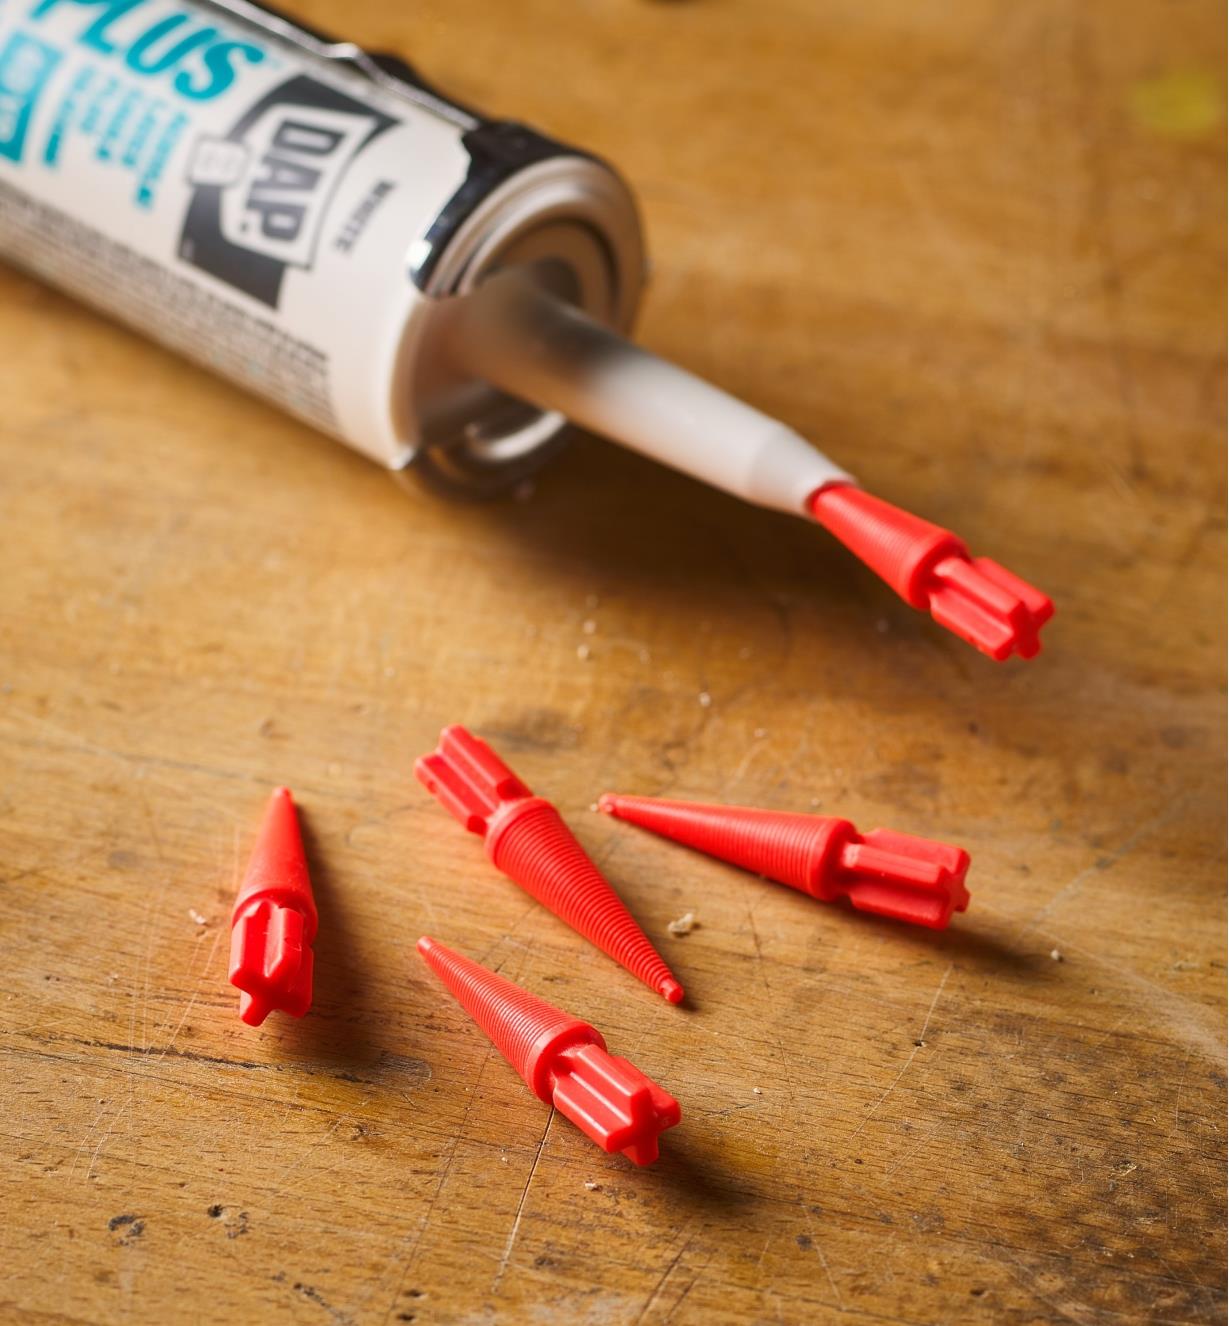 Four Twist-n-Seal stoppers next to one stopper inserted in a tube nozzle